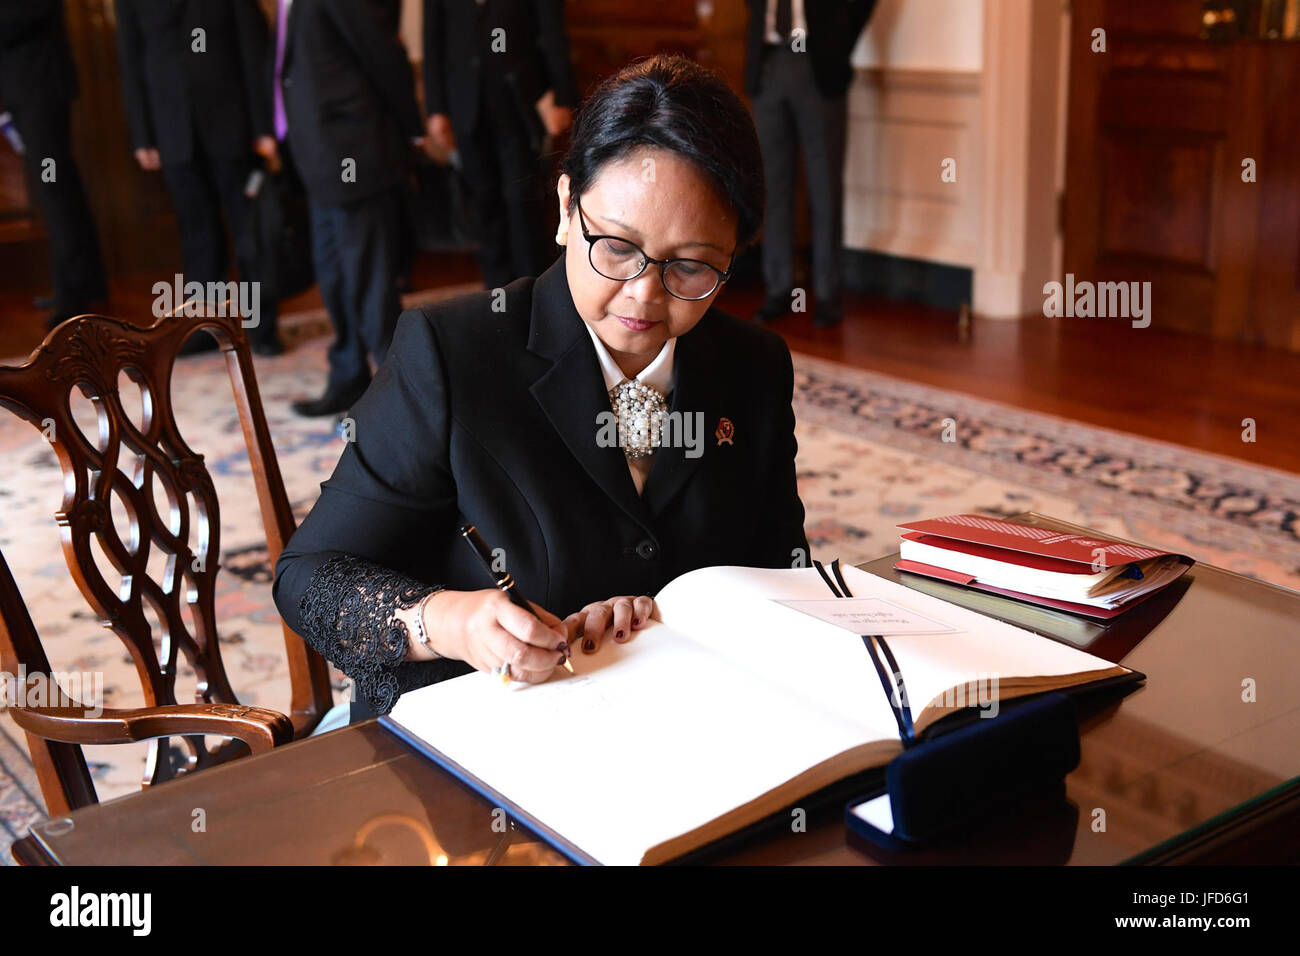 Indonesian Foreign Minister Retno Marsudi signs U.S. Secretary of State Rex Tillerson's guestbook before their bilateral meeting at the U.S. Department of State in Washington, D.C., on May 4, 2017. Stock Photo